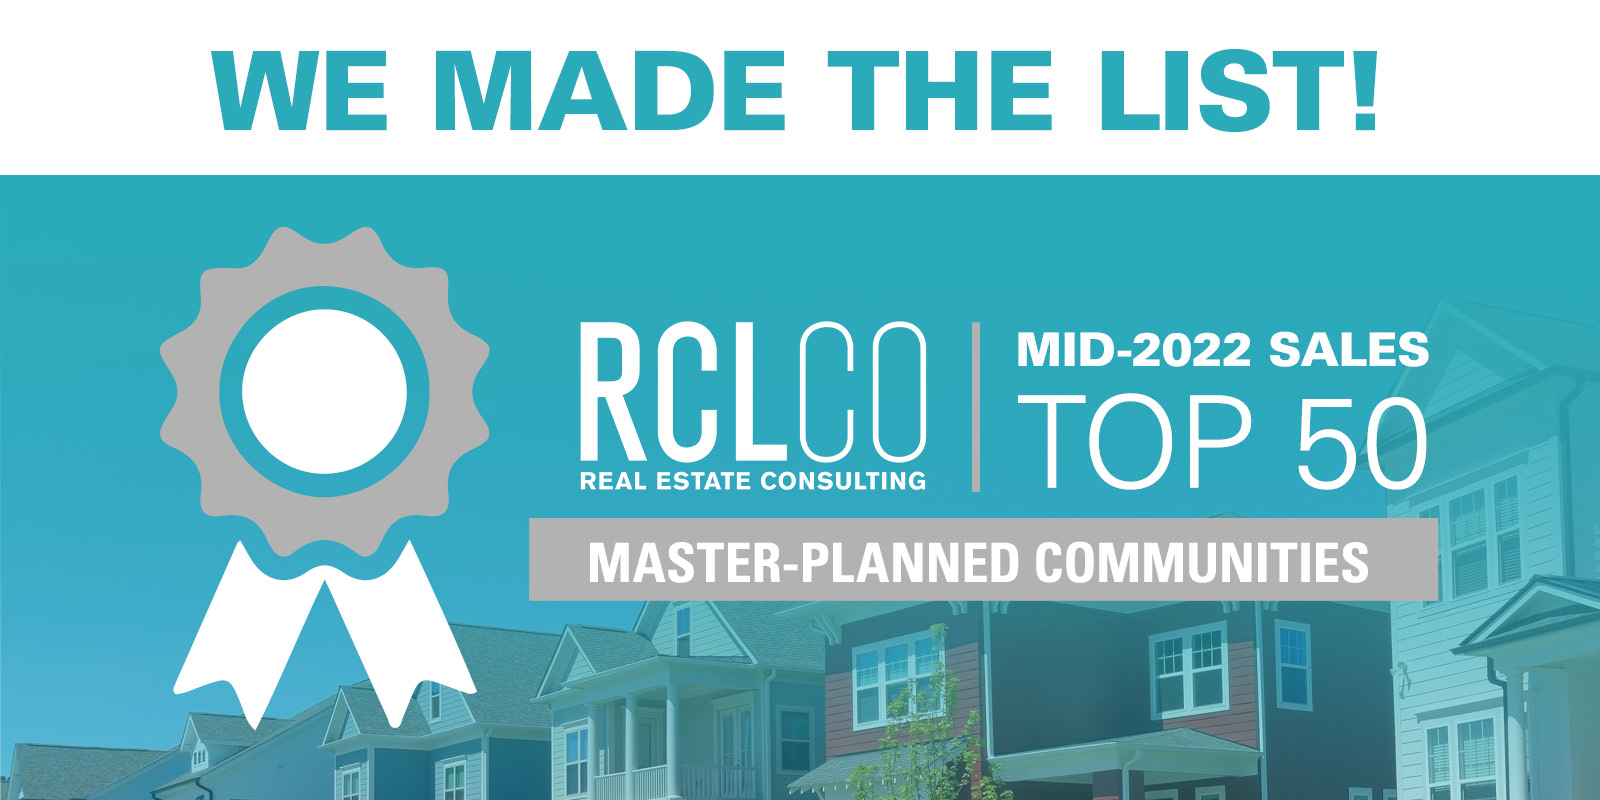 River Islands Named Top-Selling Master-Planned Community in Northern California – Again!